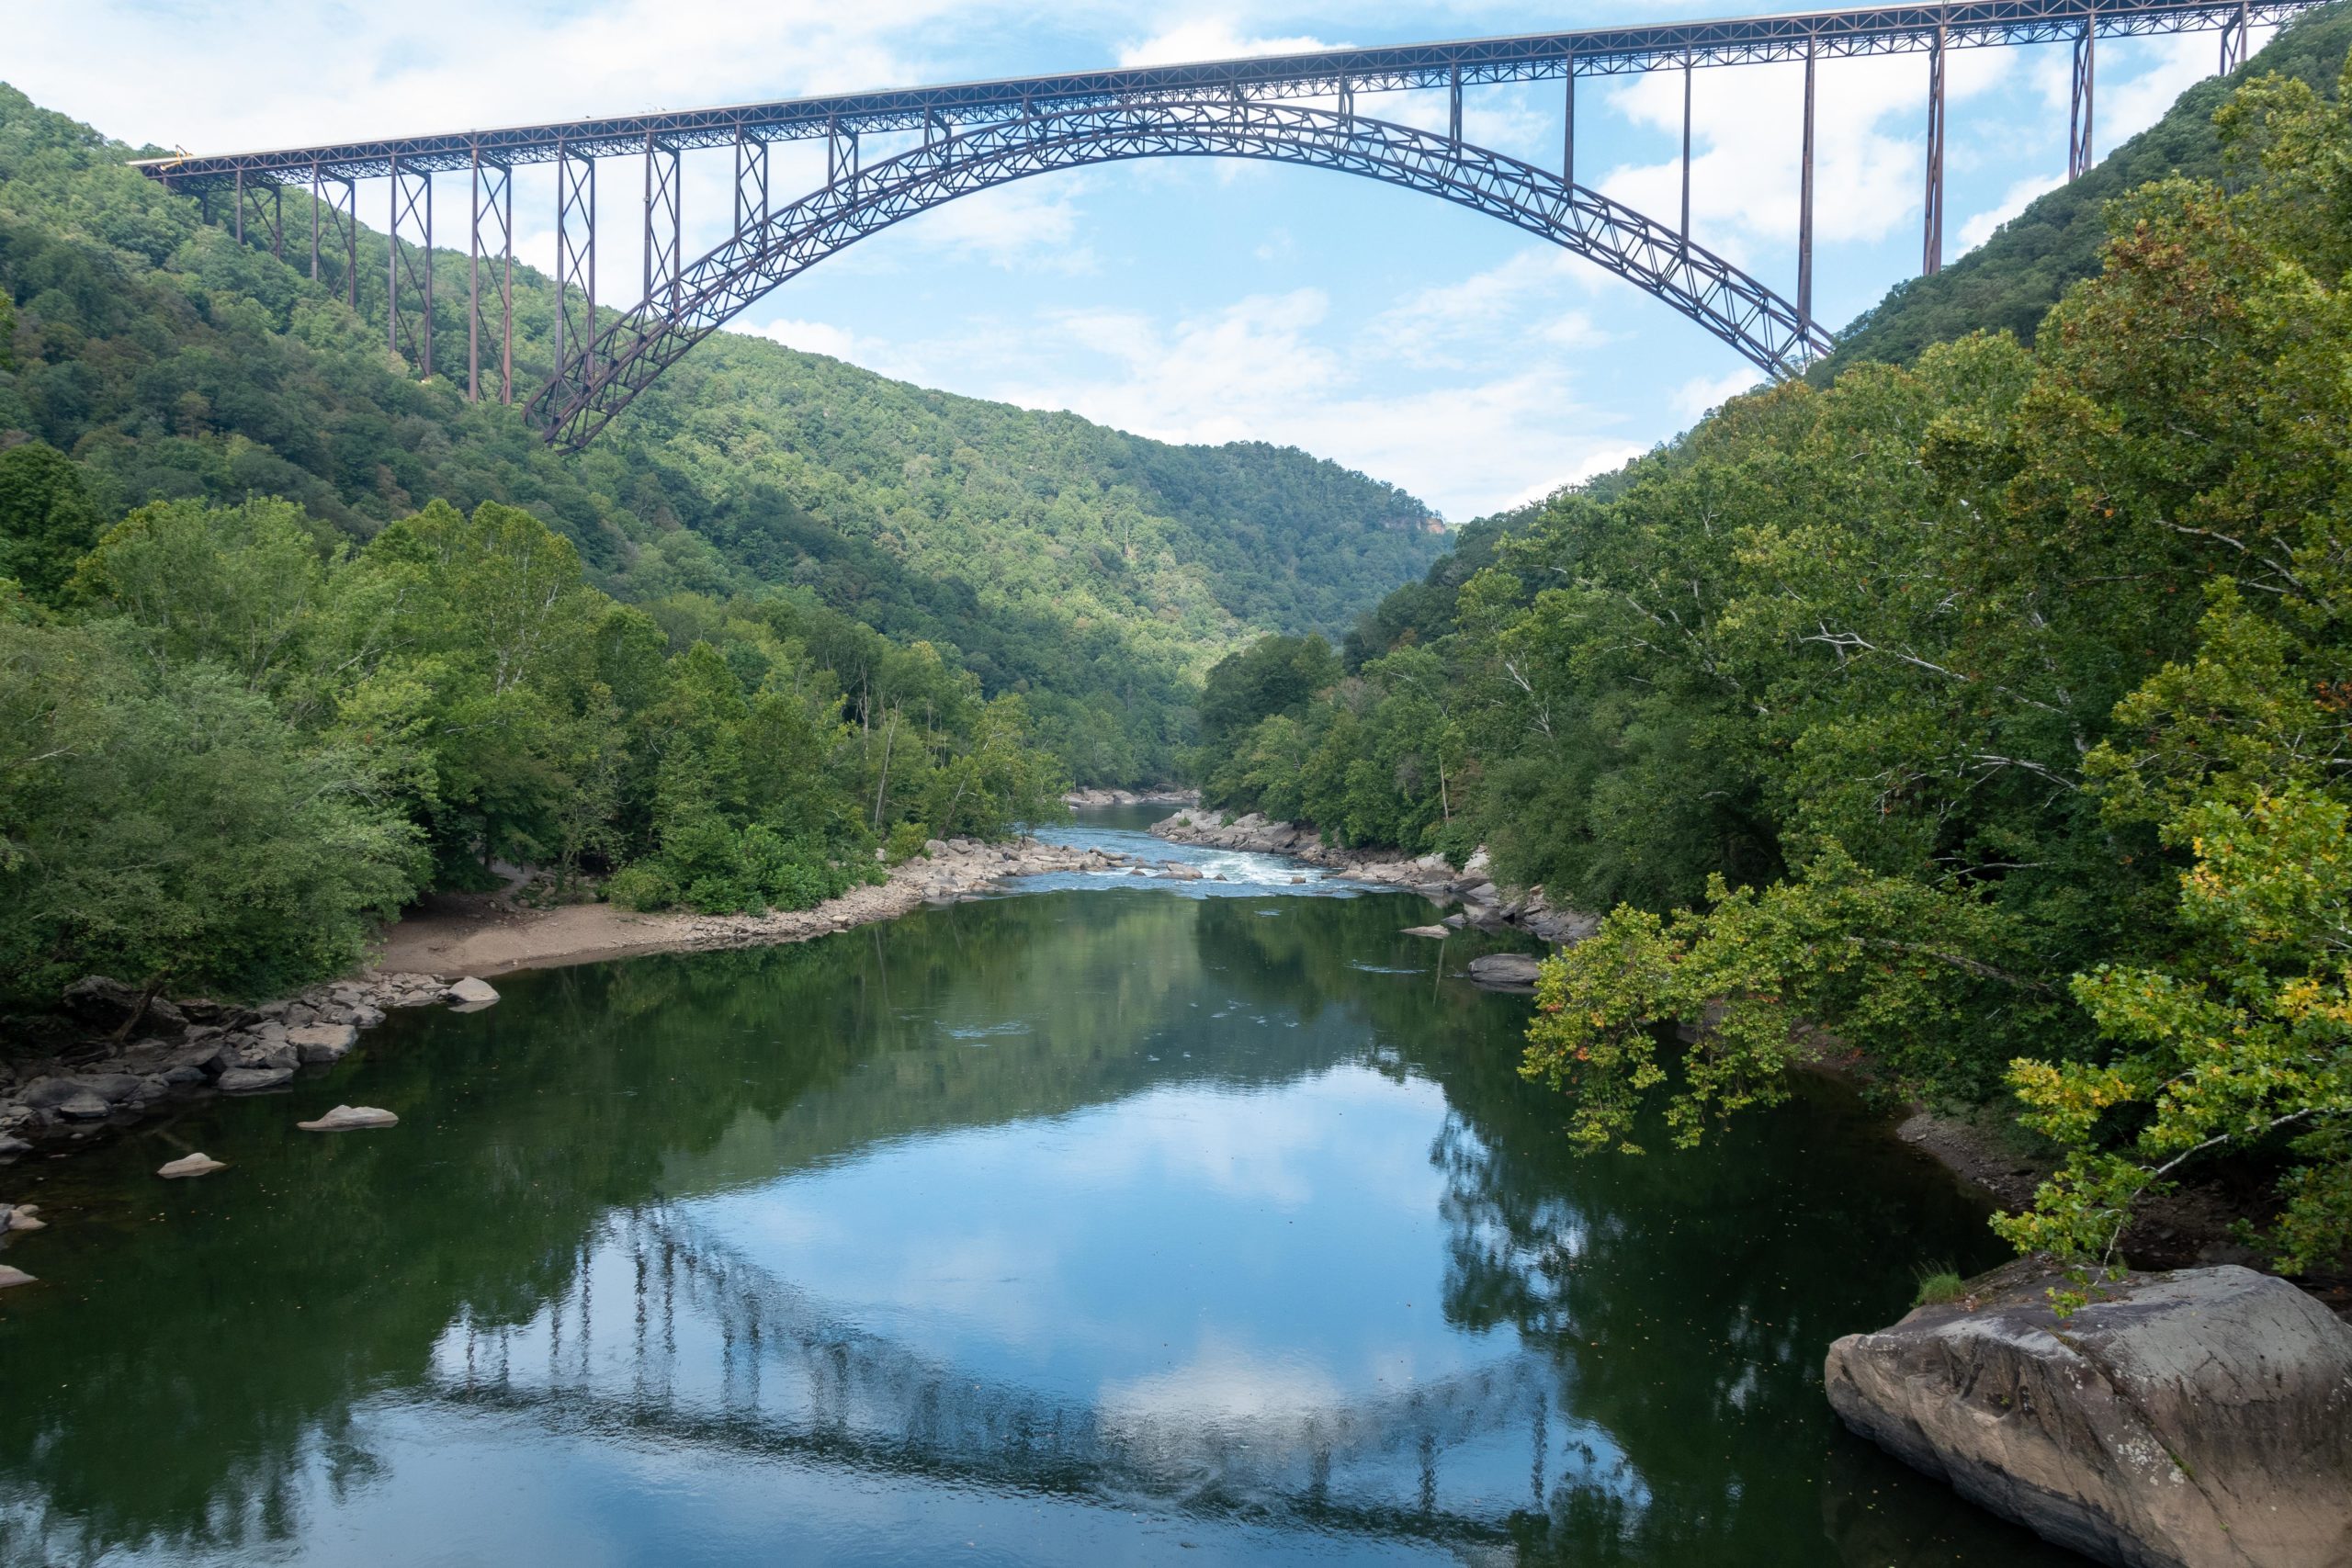 A Visit to New River Gorge National Park (part one)